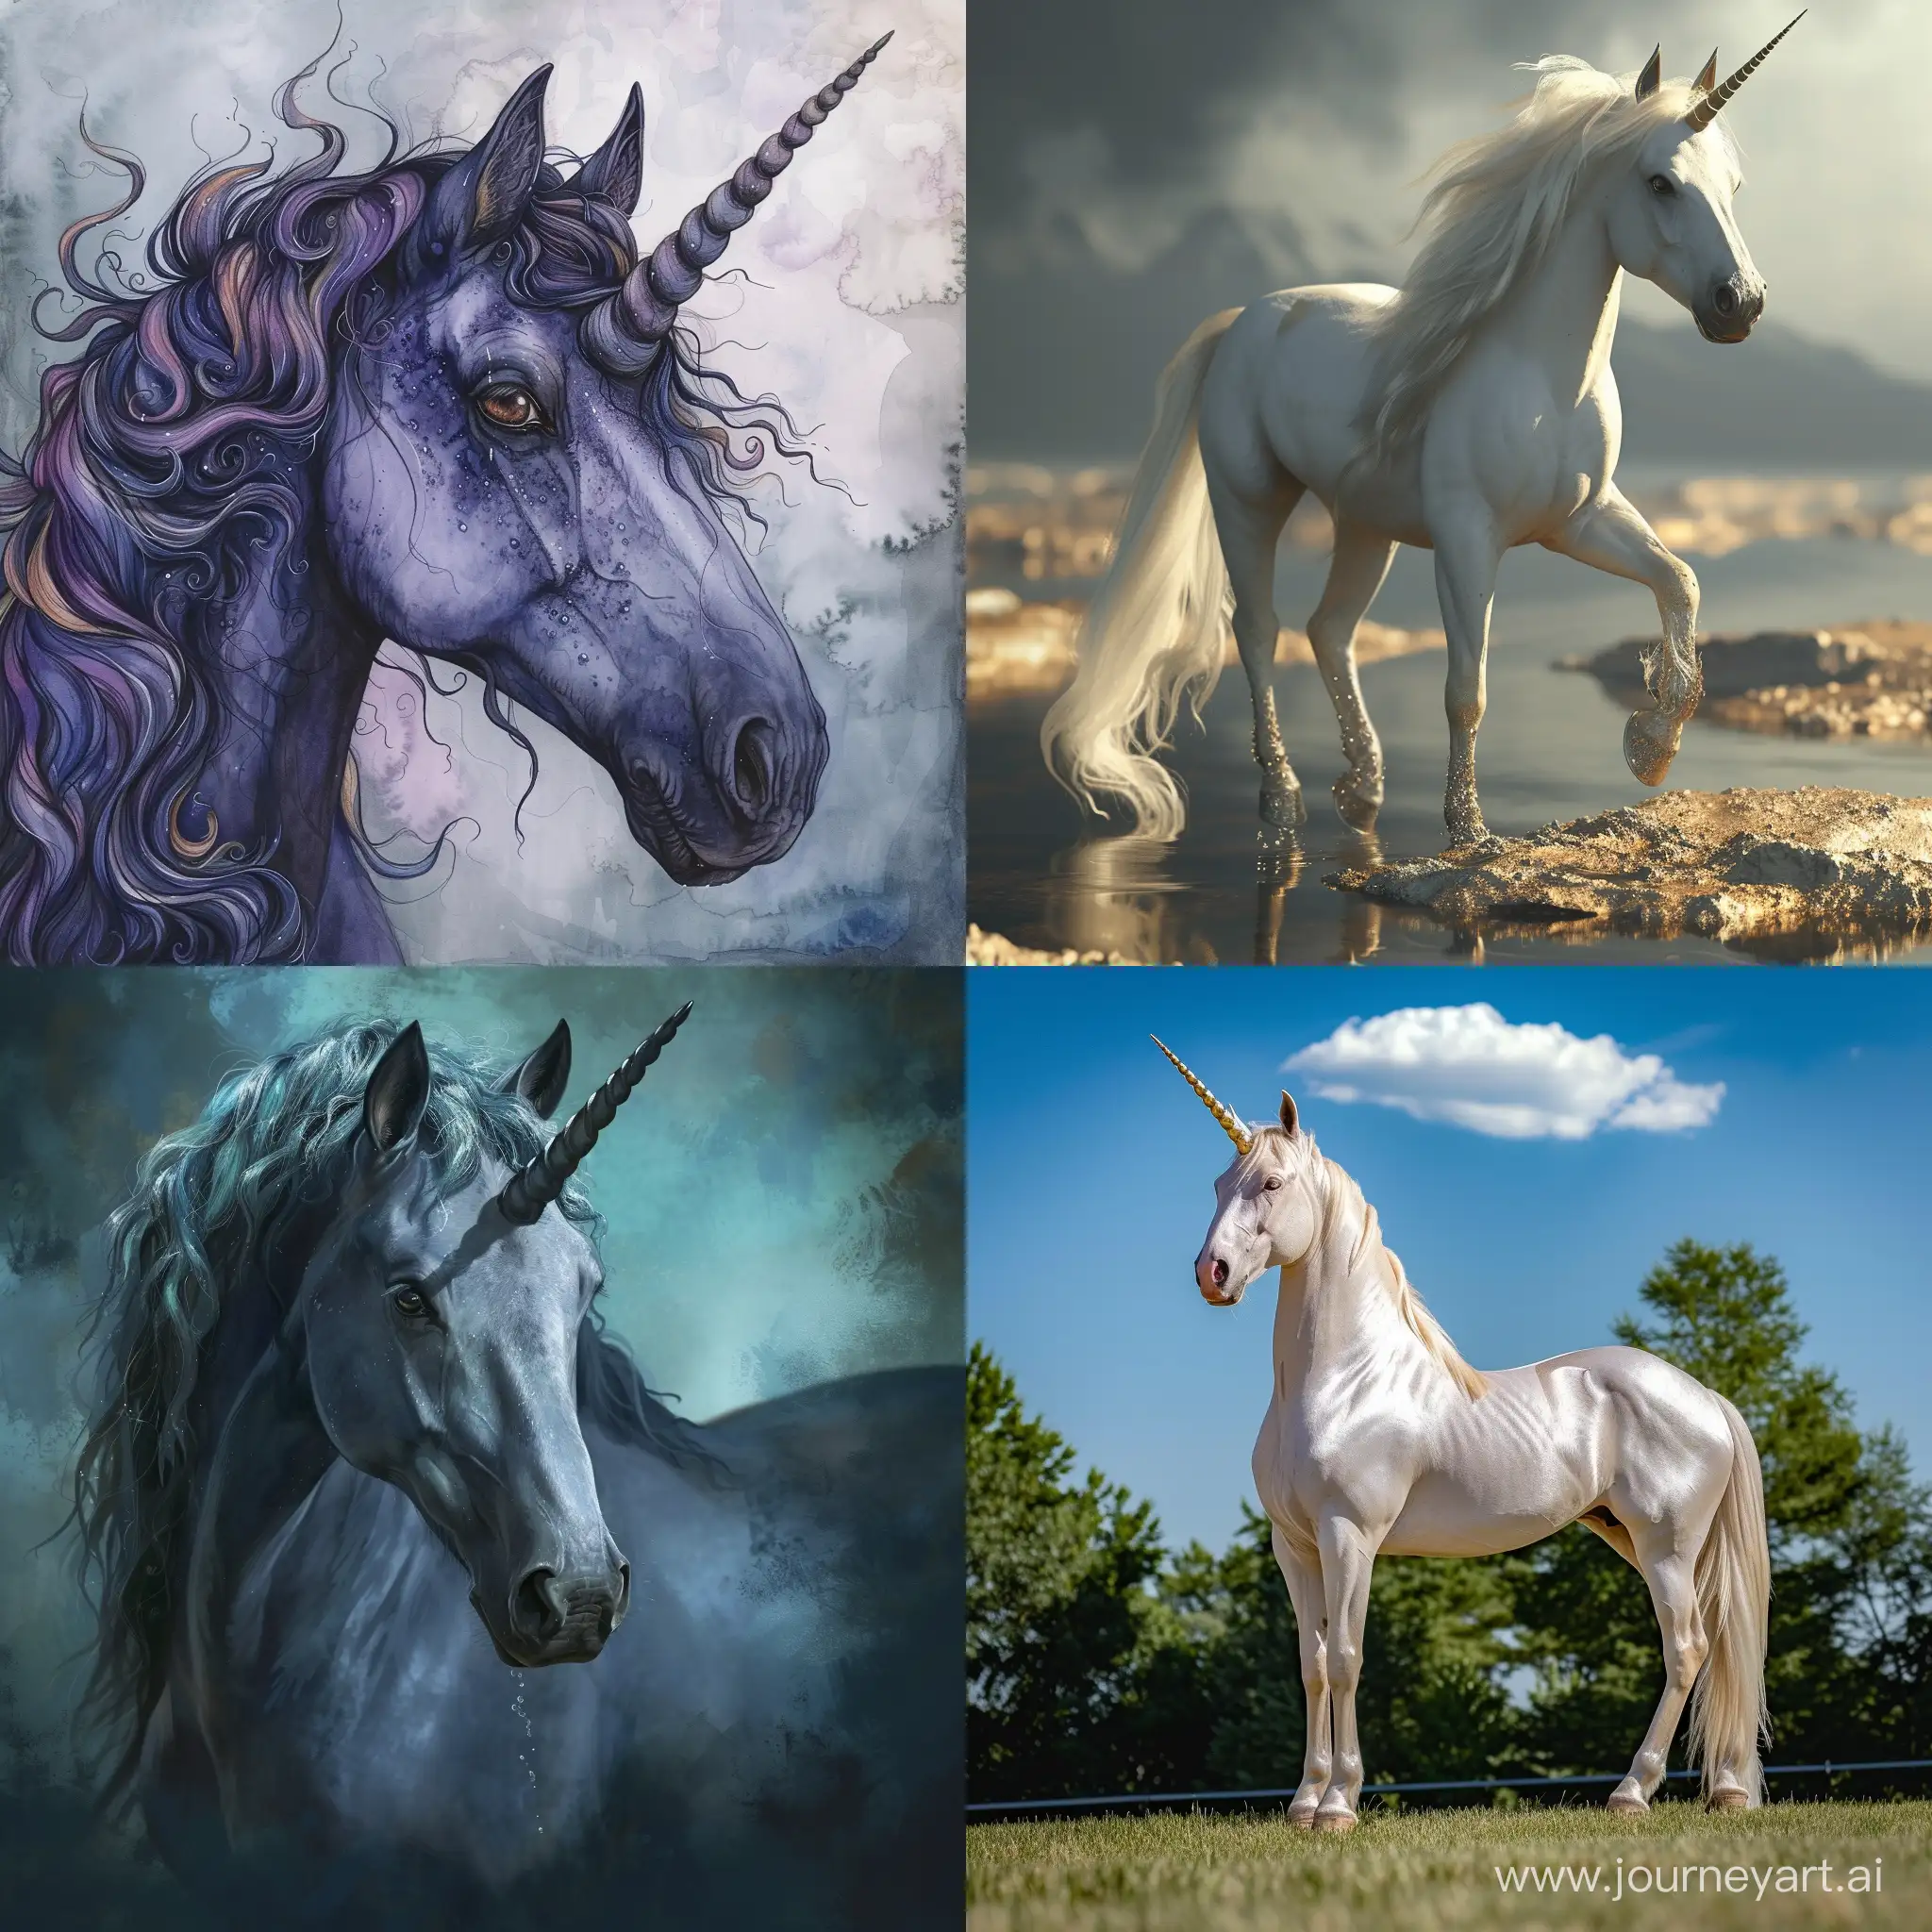 Enchanting-Encounter-Troubled-Unicorn-and-Lone-Horse-in-a-Mystical-Landscape